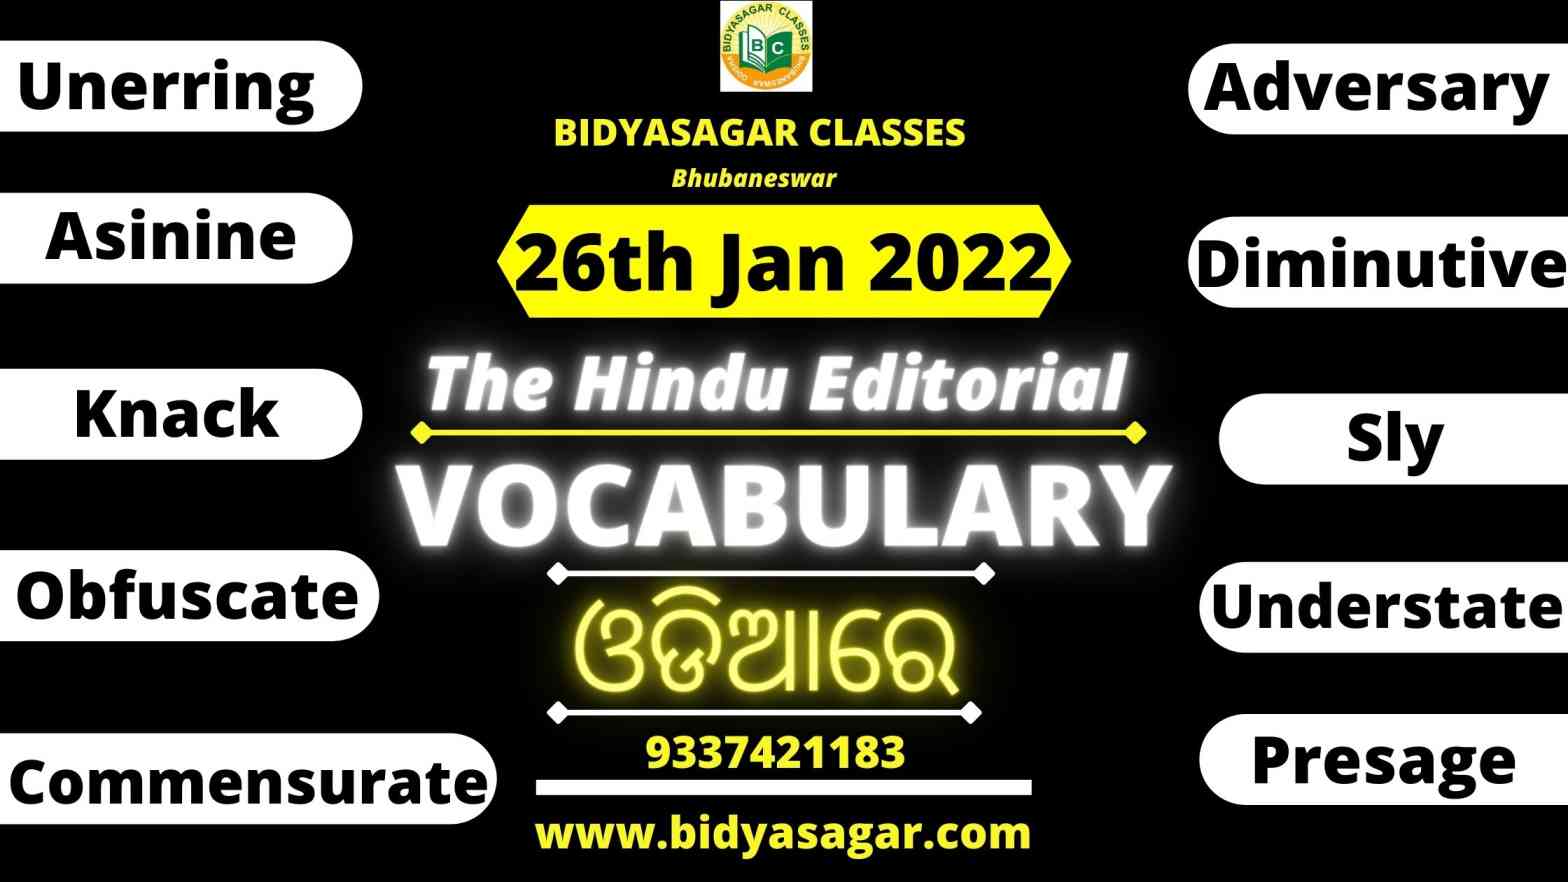 The Hindu Editorial Vocabulary of 26th January 2022